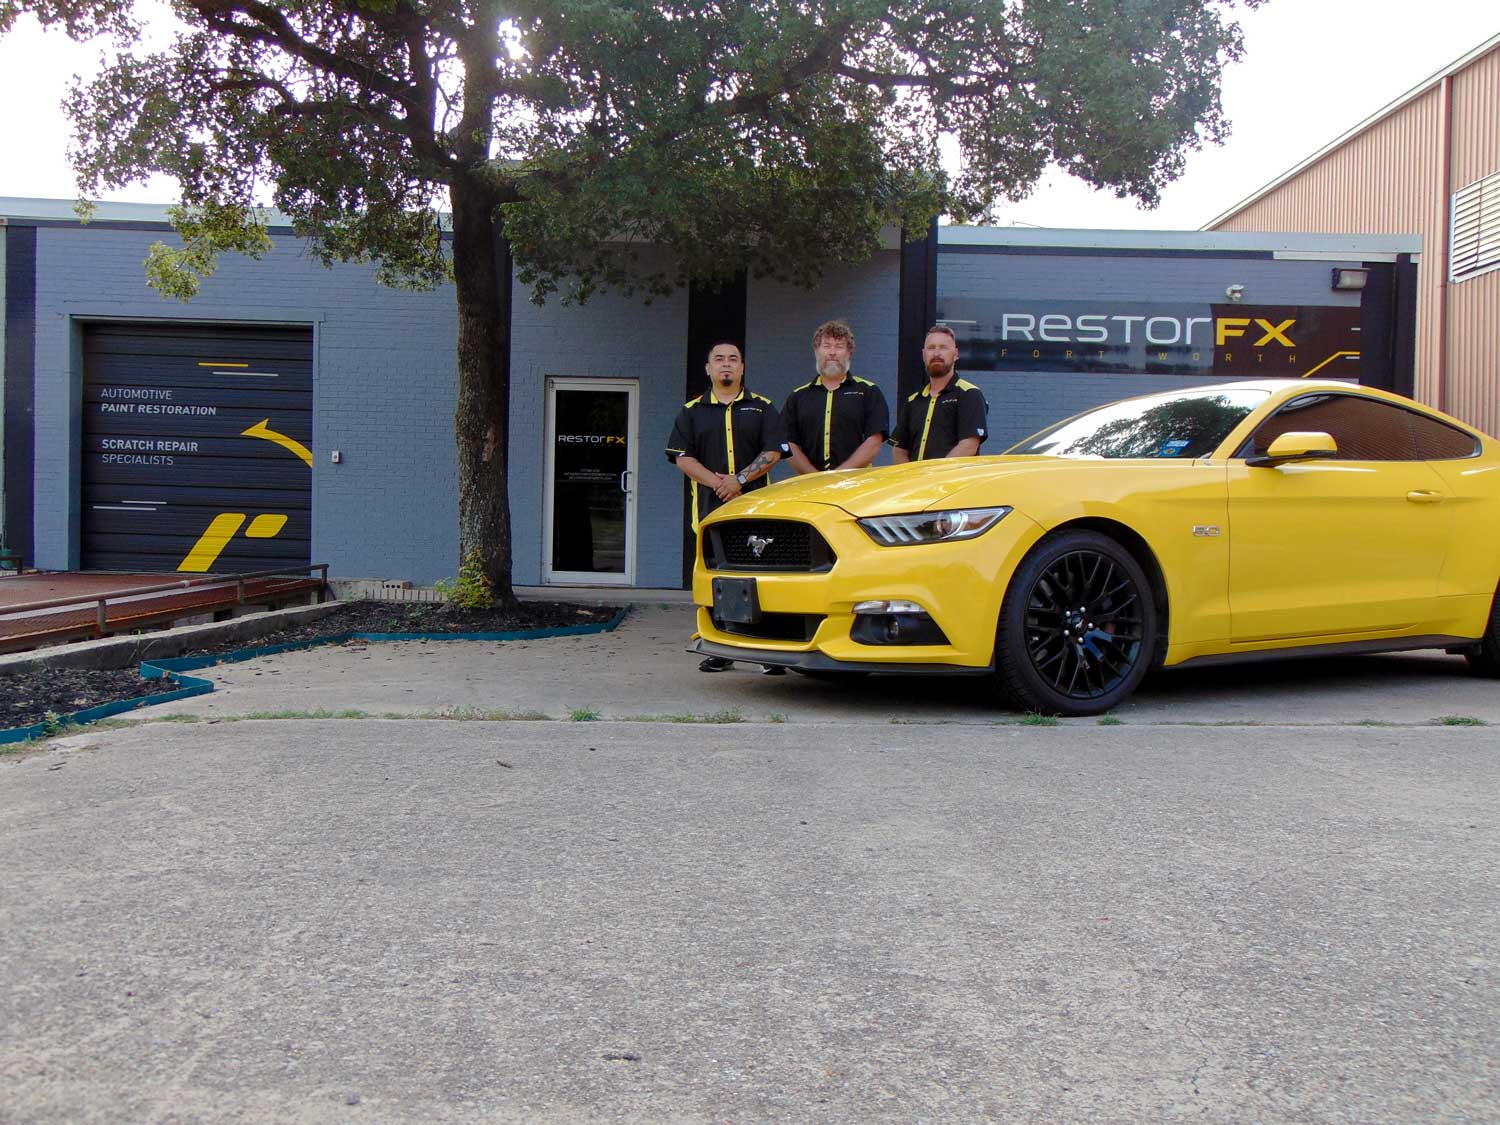 RestorFX Fort Worth team in front of the Center with a gray brick facade, branded signage and a yellow Ford Mustang sports car